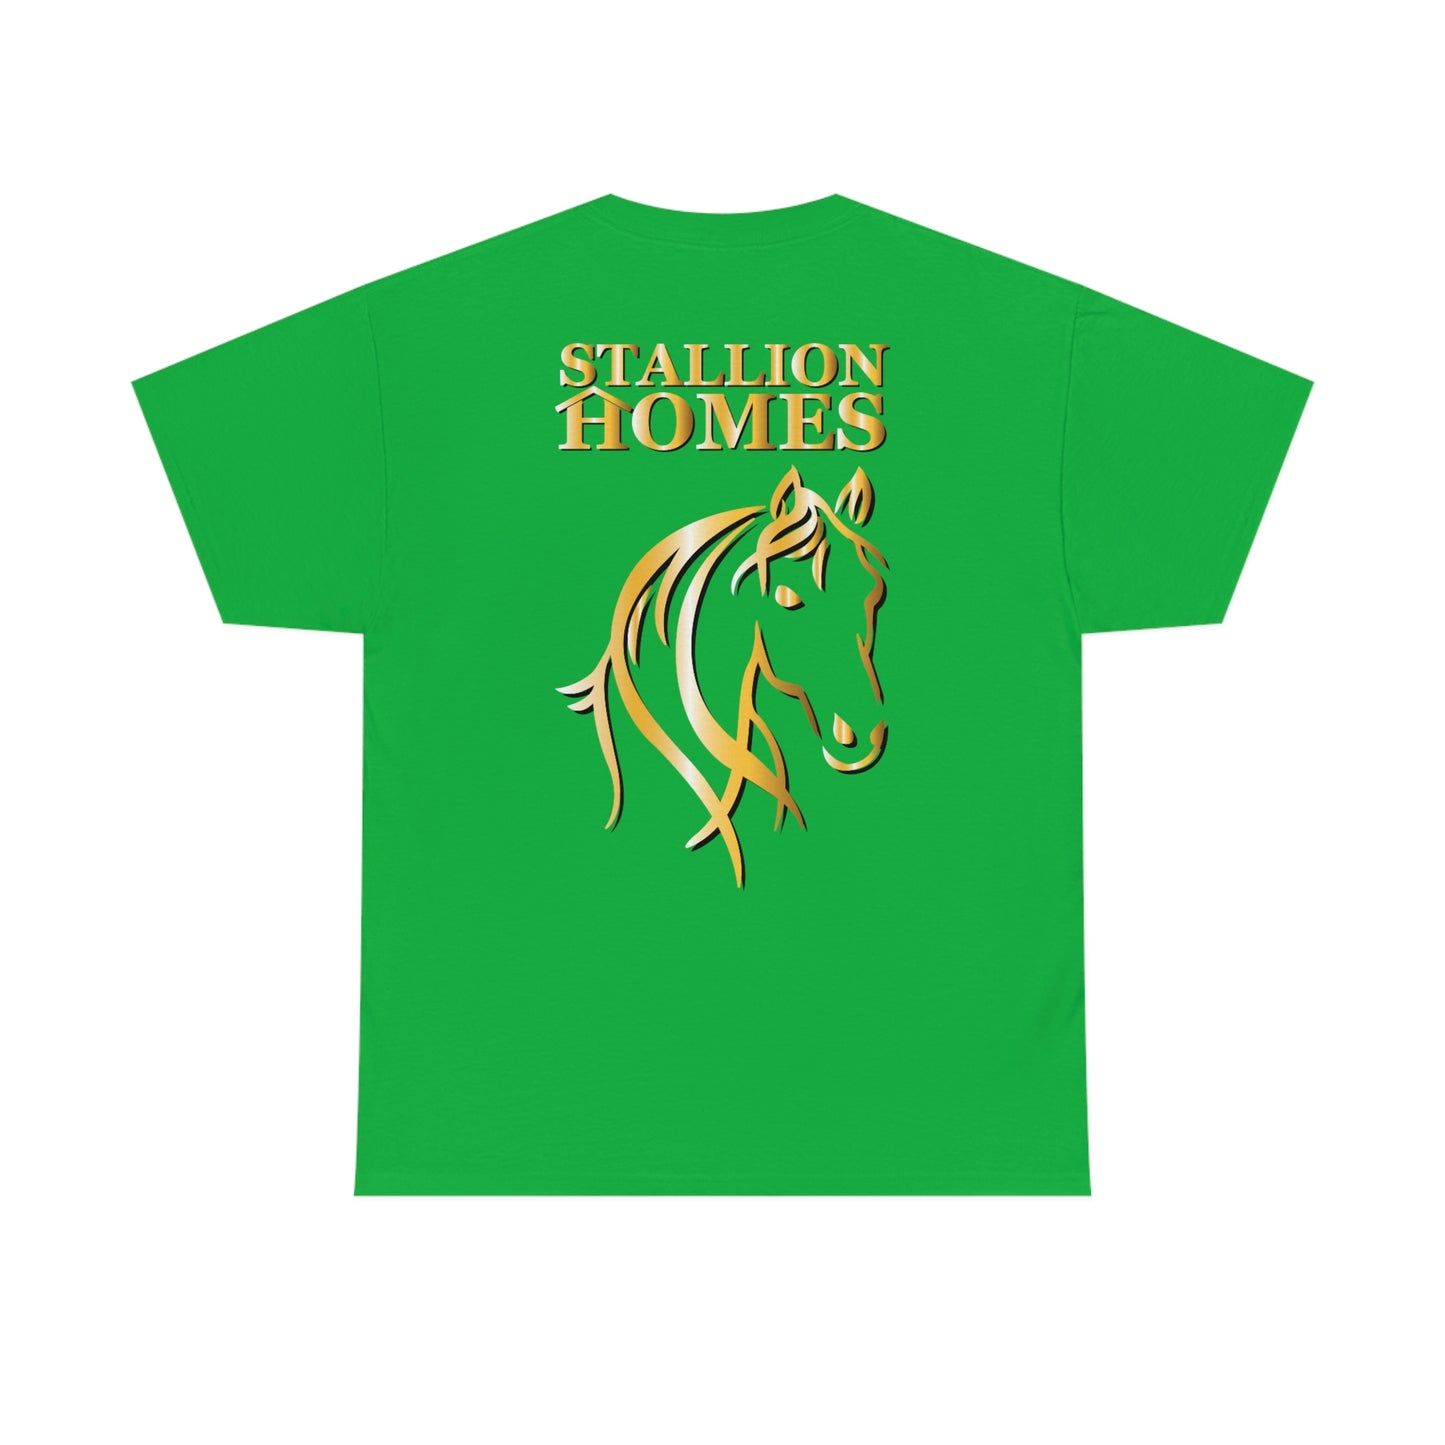 Stallion Homes Gold Back Only Heavy Cotton Tee